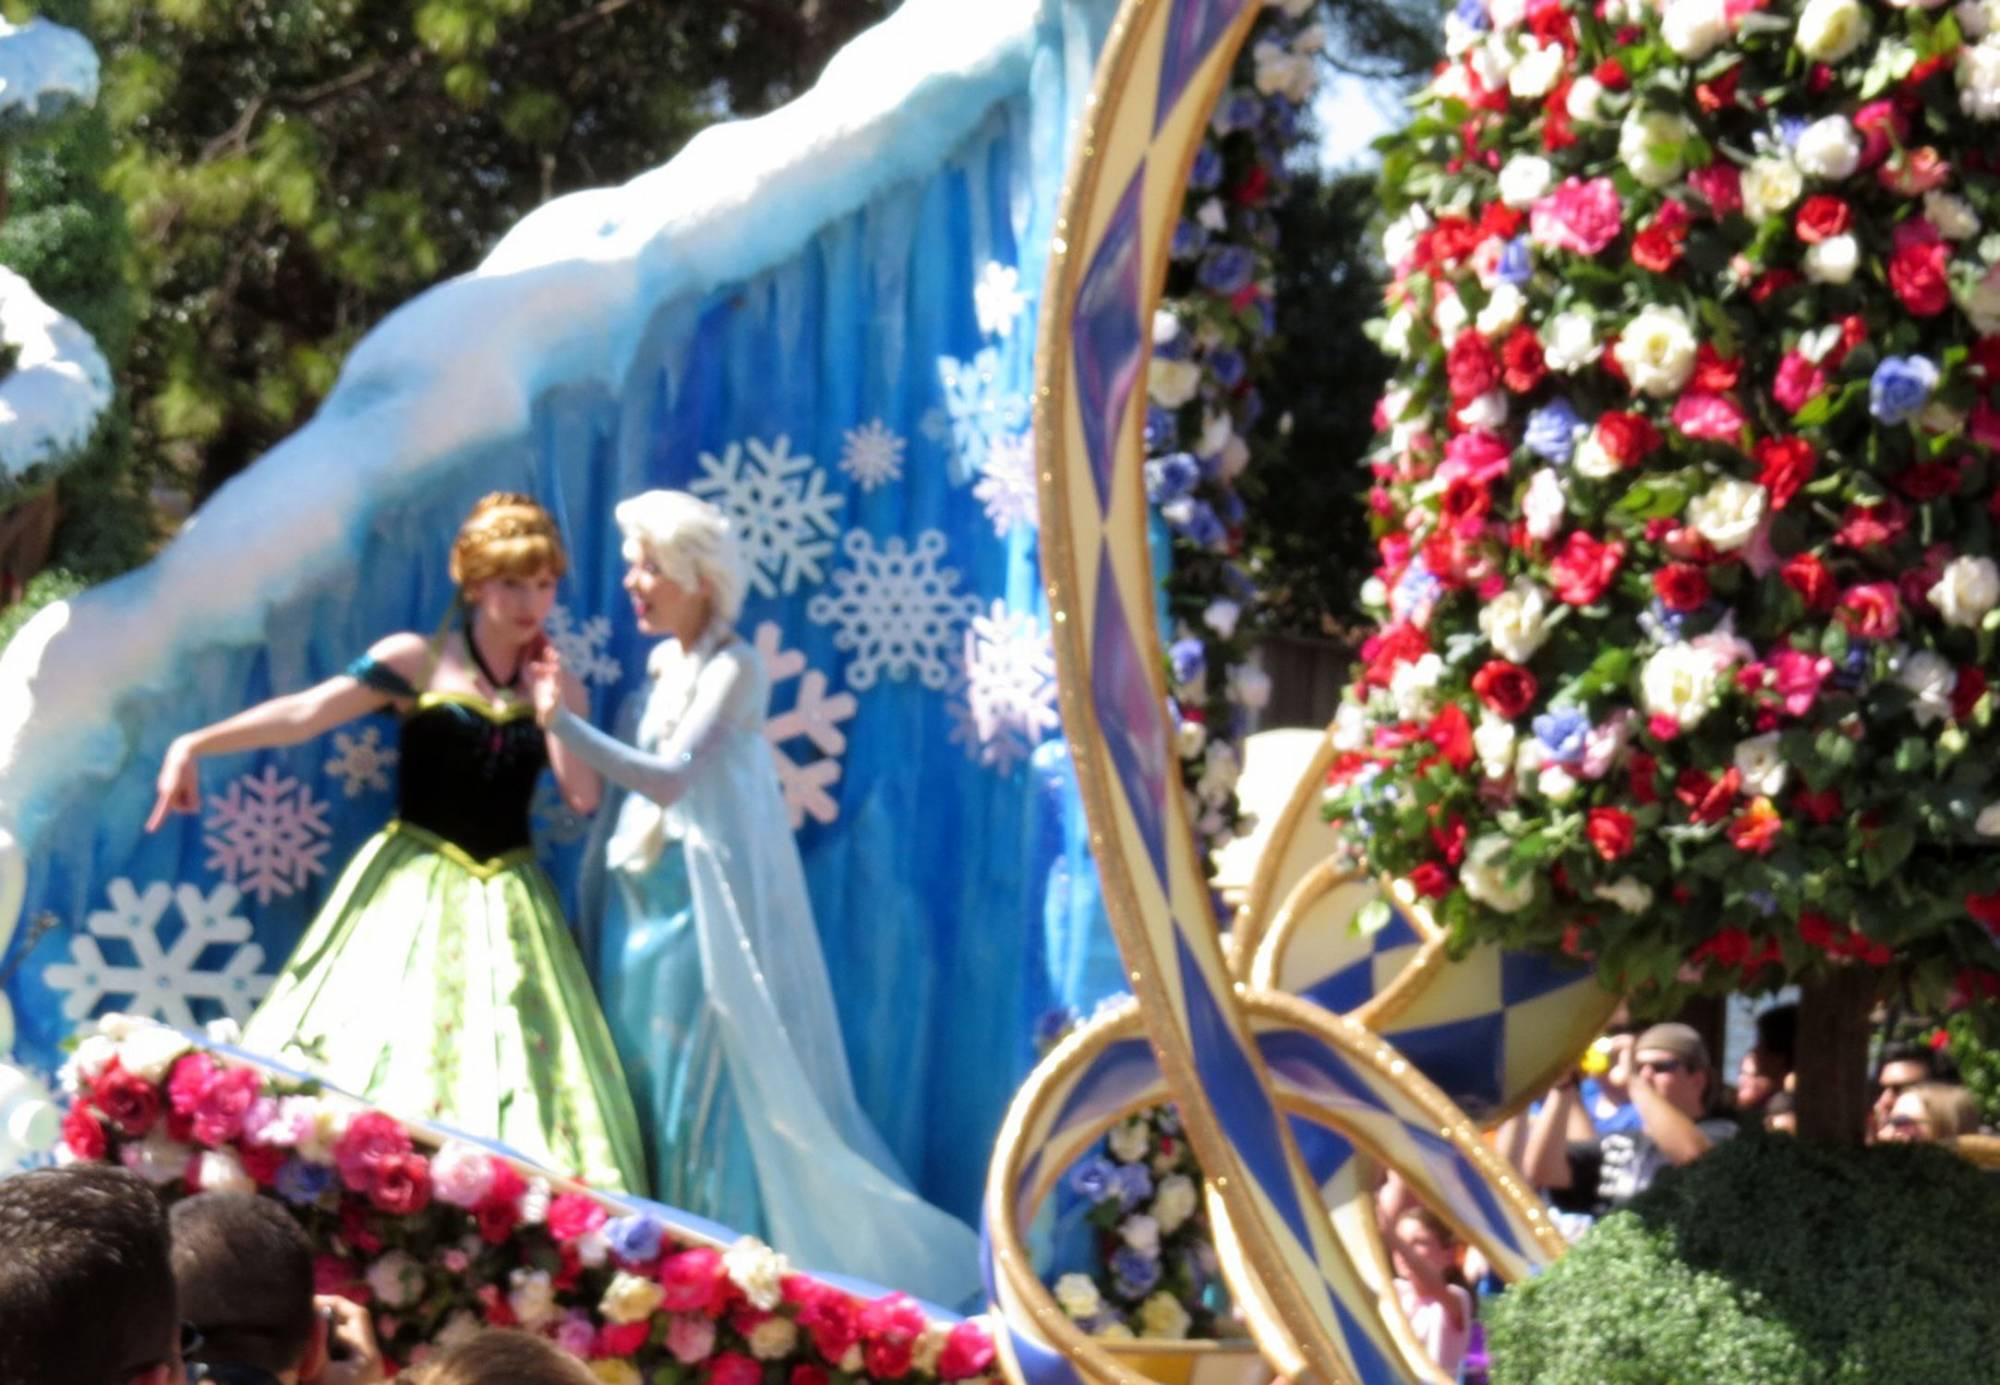 Imagine all the ways Disney could bring 'Frozen' to life at Disney theme parks |PassPorter.com